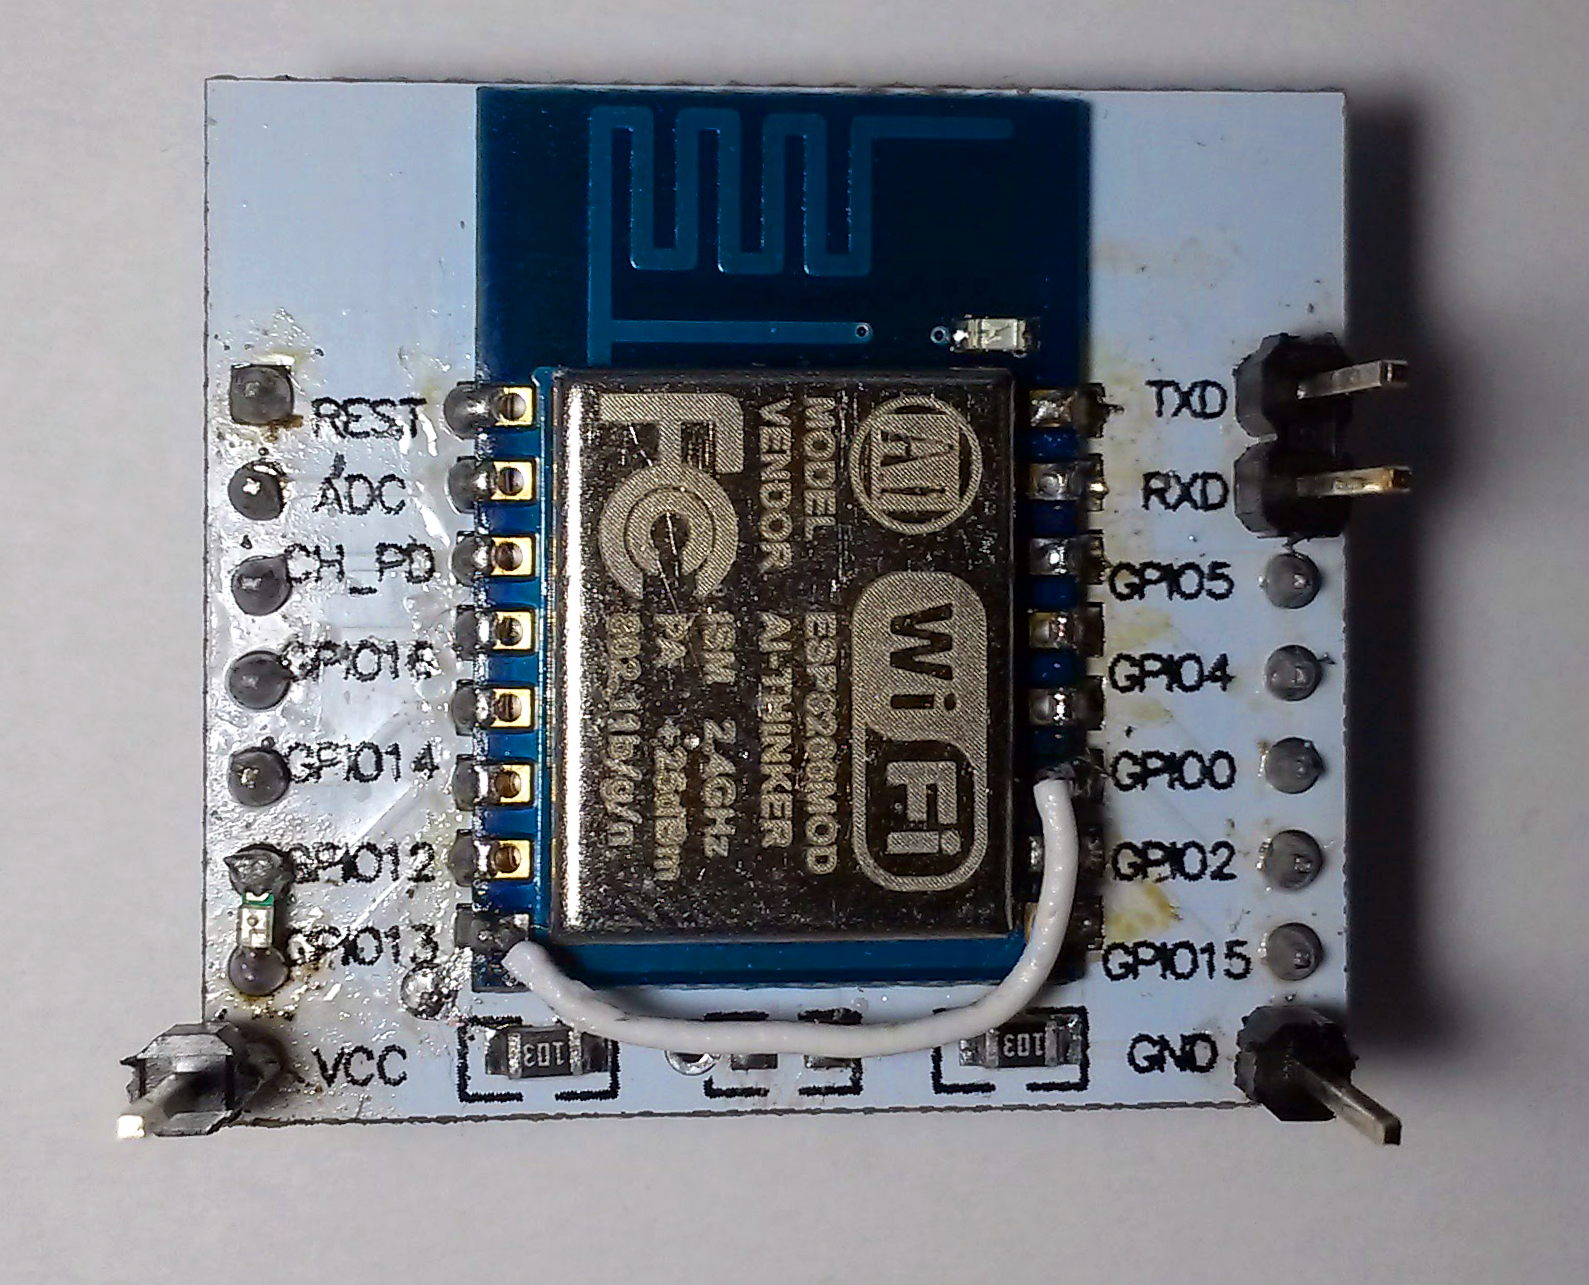 Top view on the assembled board. Single 0603 resistor and a piece of wire is needed to boot ESP from flash.